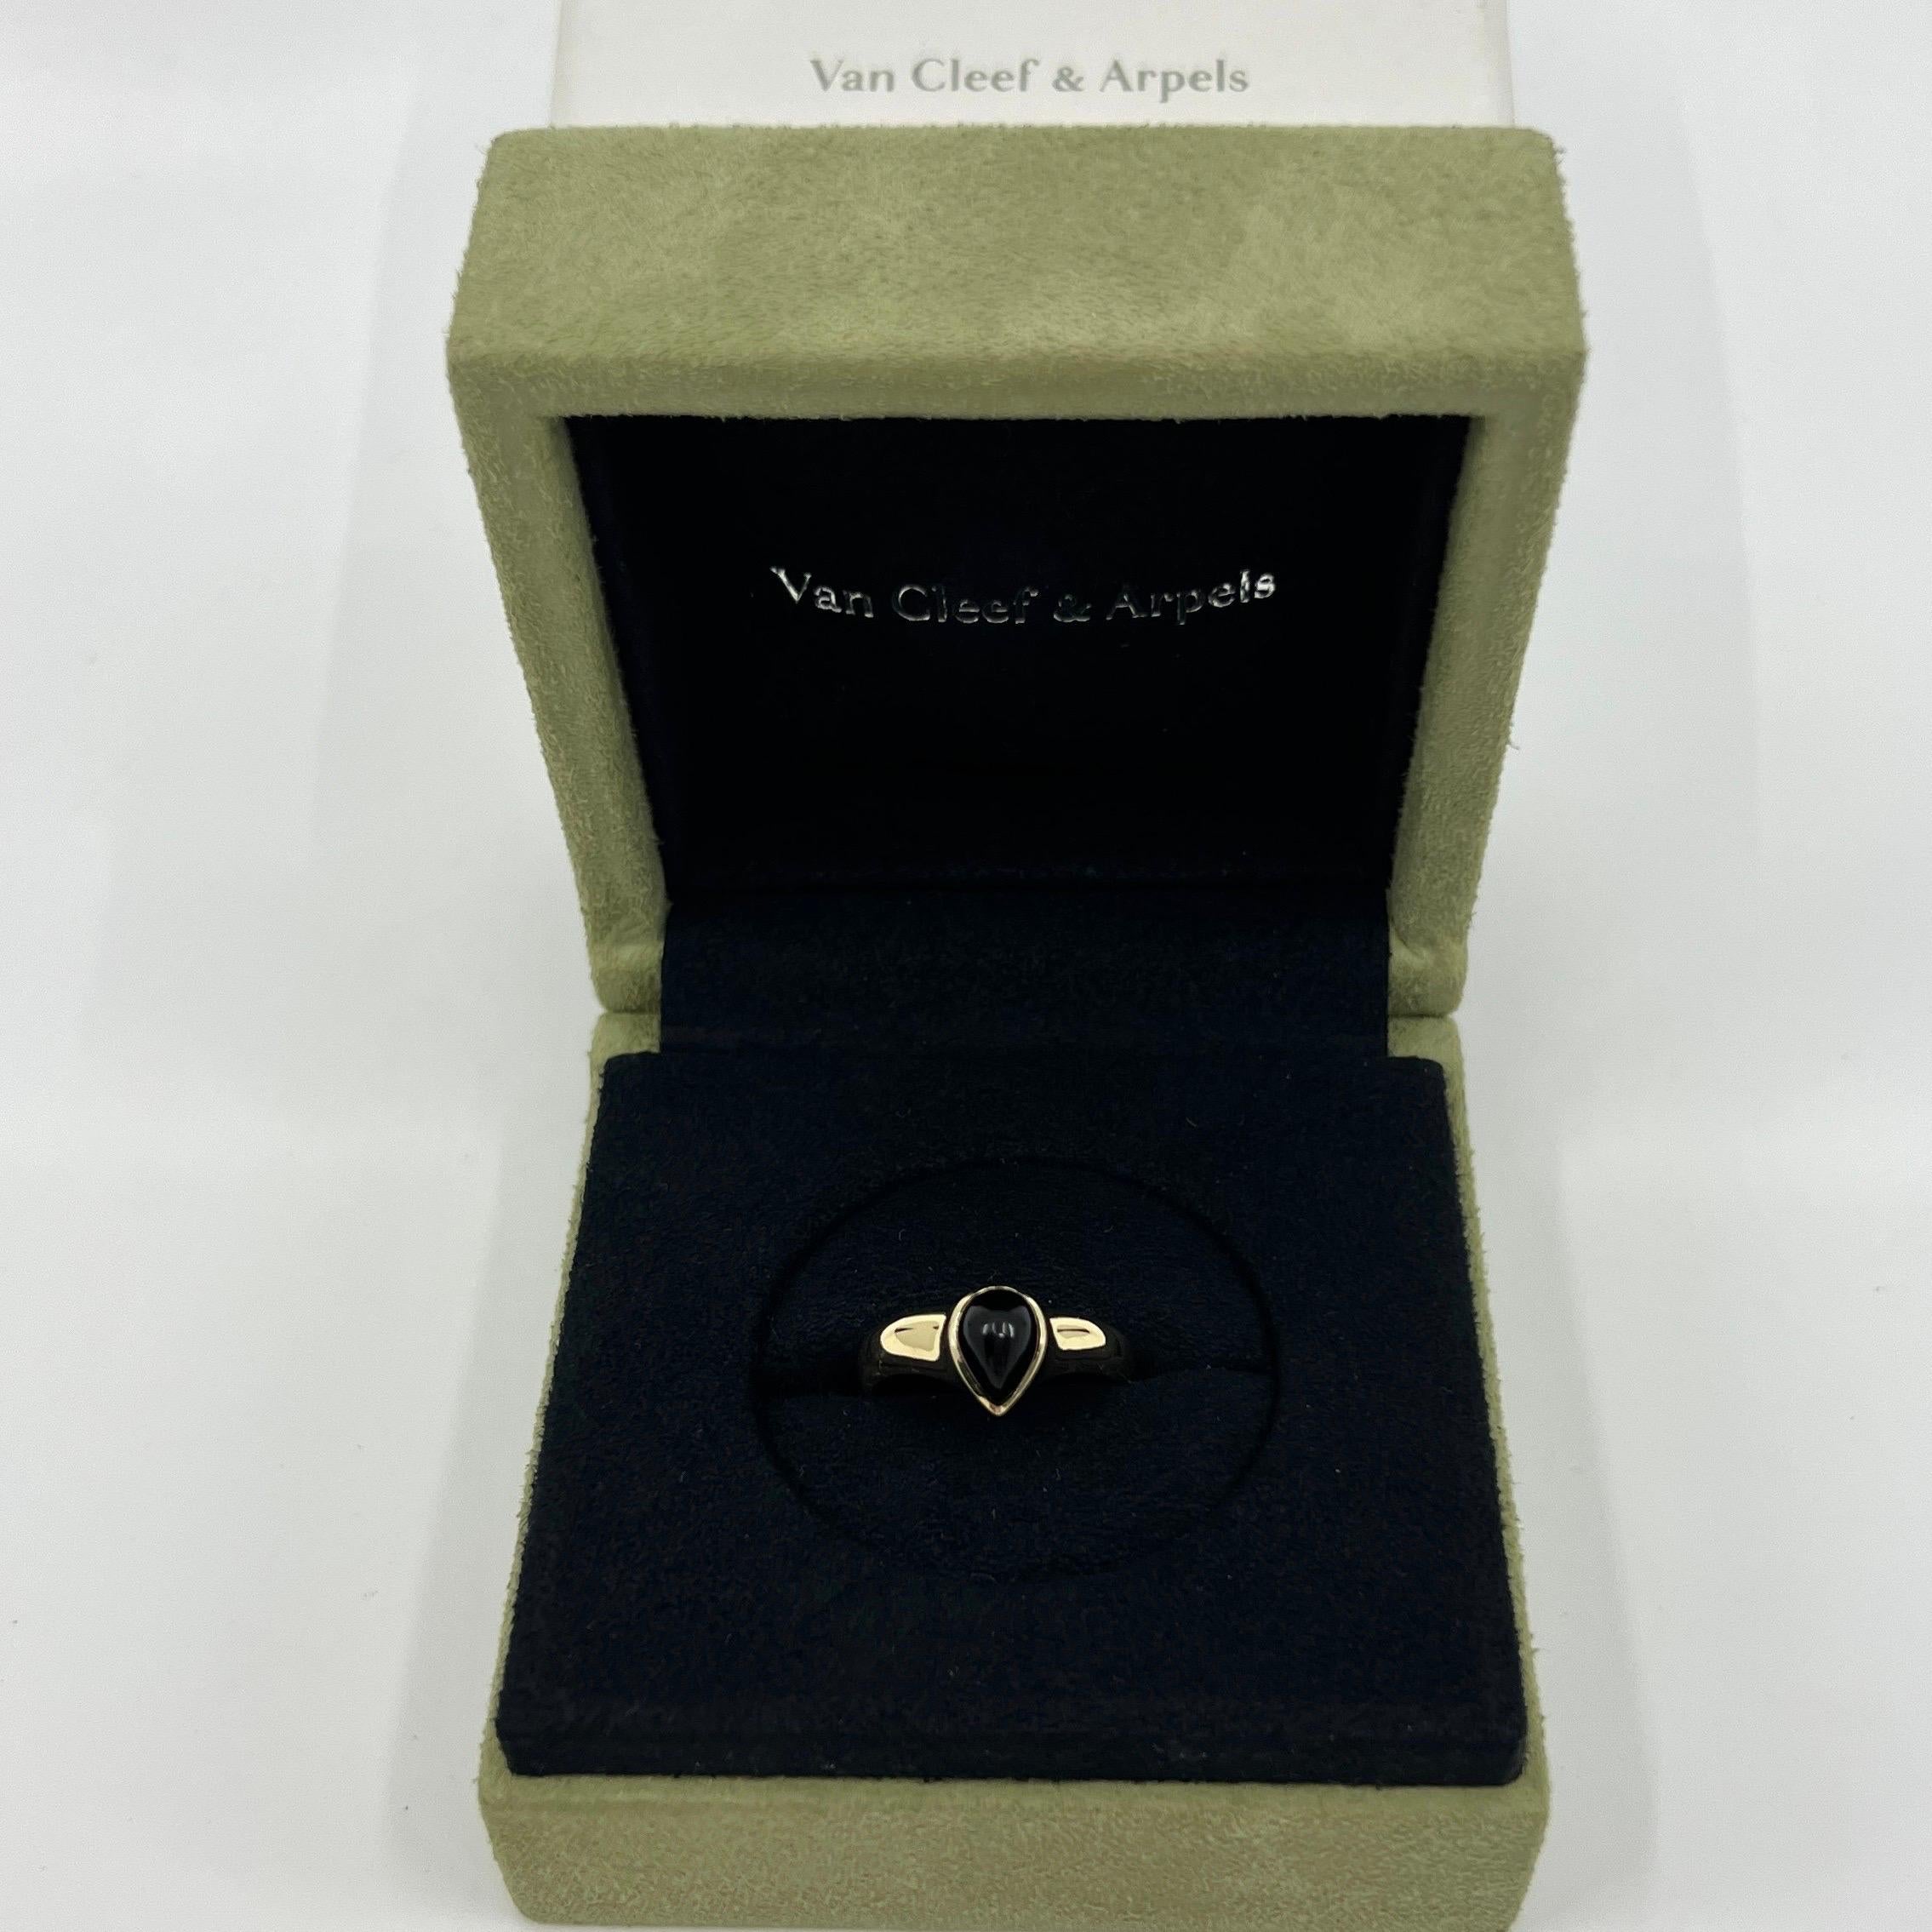 Rare Vintage Van Cleef & Arpels Black Onyx Pear Cut 18k Yellow Gold Solitaire Ring.

A stunning vintage Van Cleef & Arpels ring with a beautiful, top grade onyx with a deep black colour and excellent pear cabochon cut. Fine jewellery houses like Van